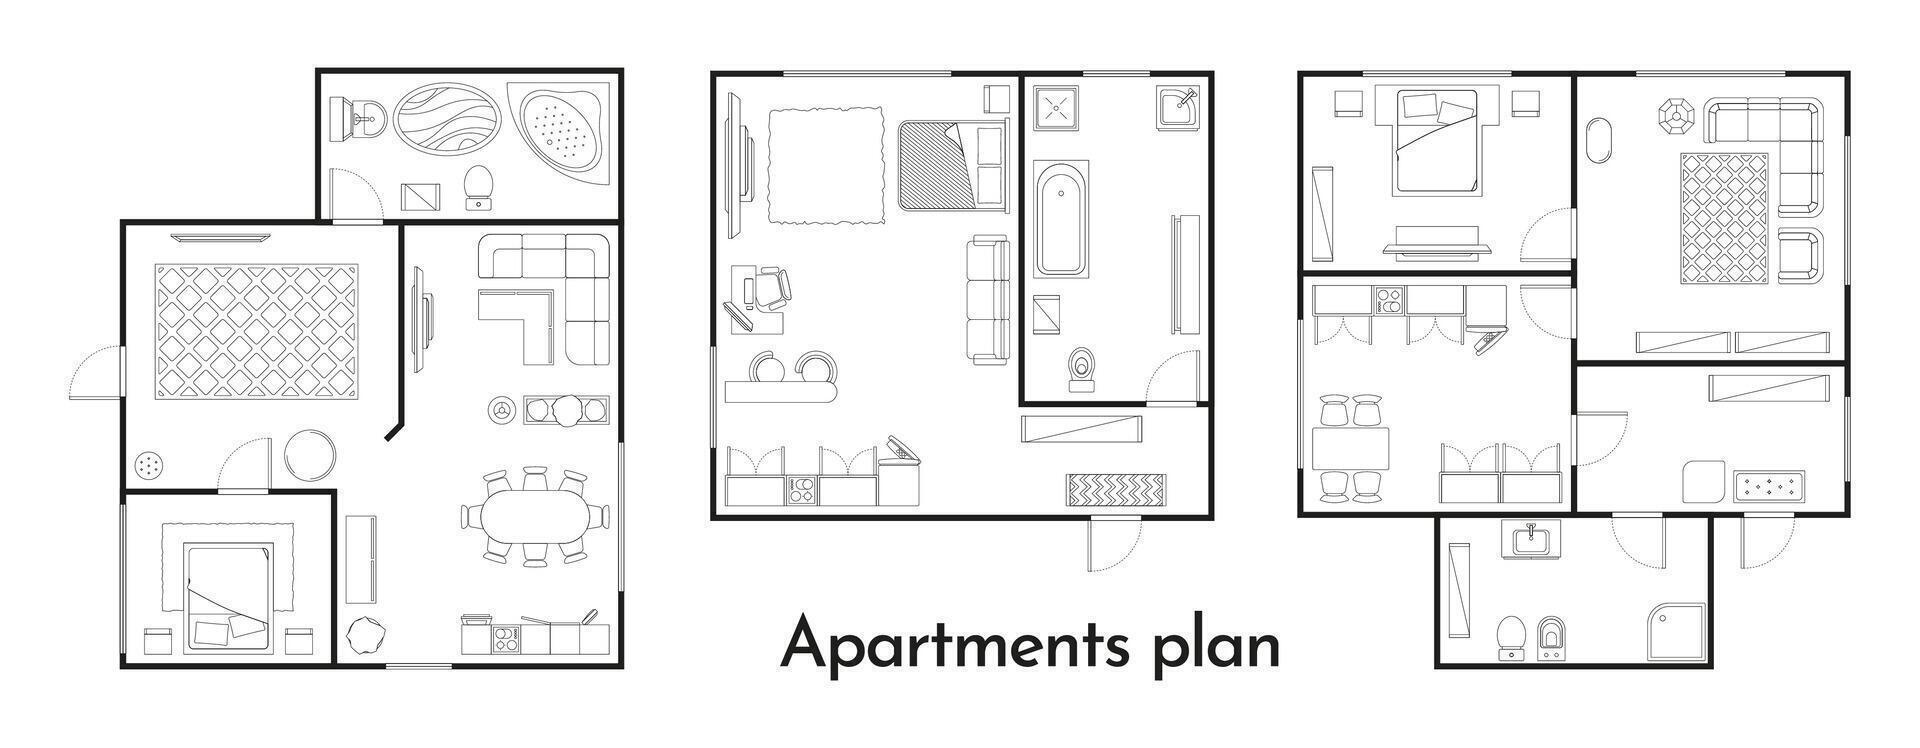 Apartment plan. Room floor plan with furniture and window, home, office and bedroom layout. Vector apartment building floor plan